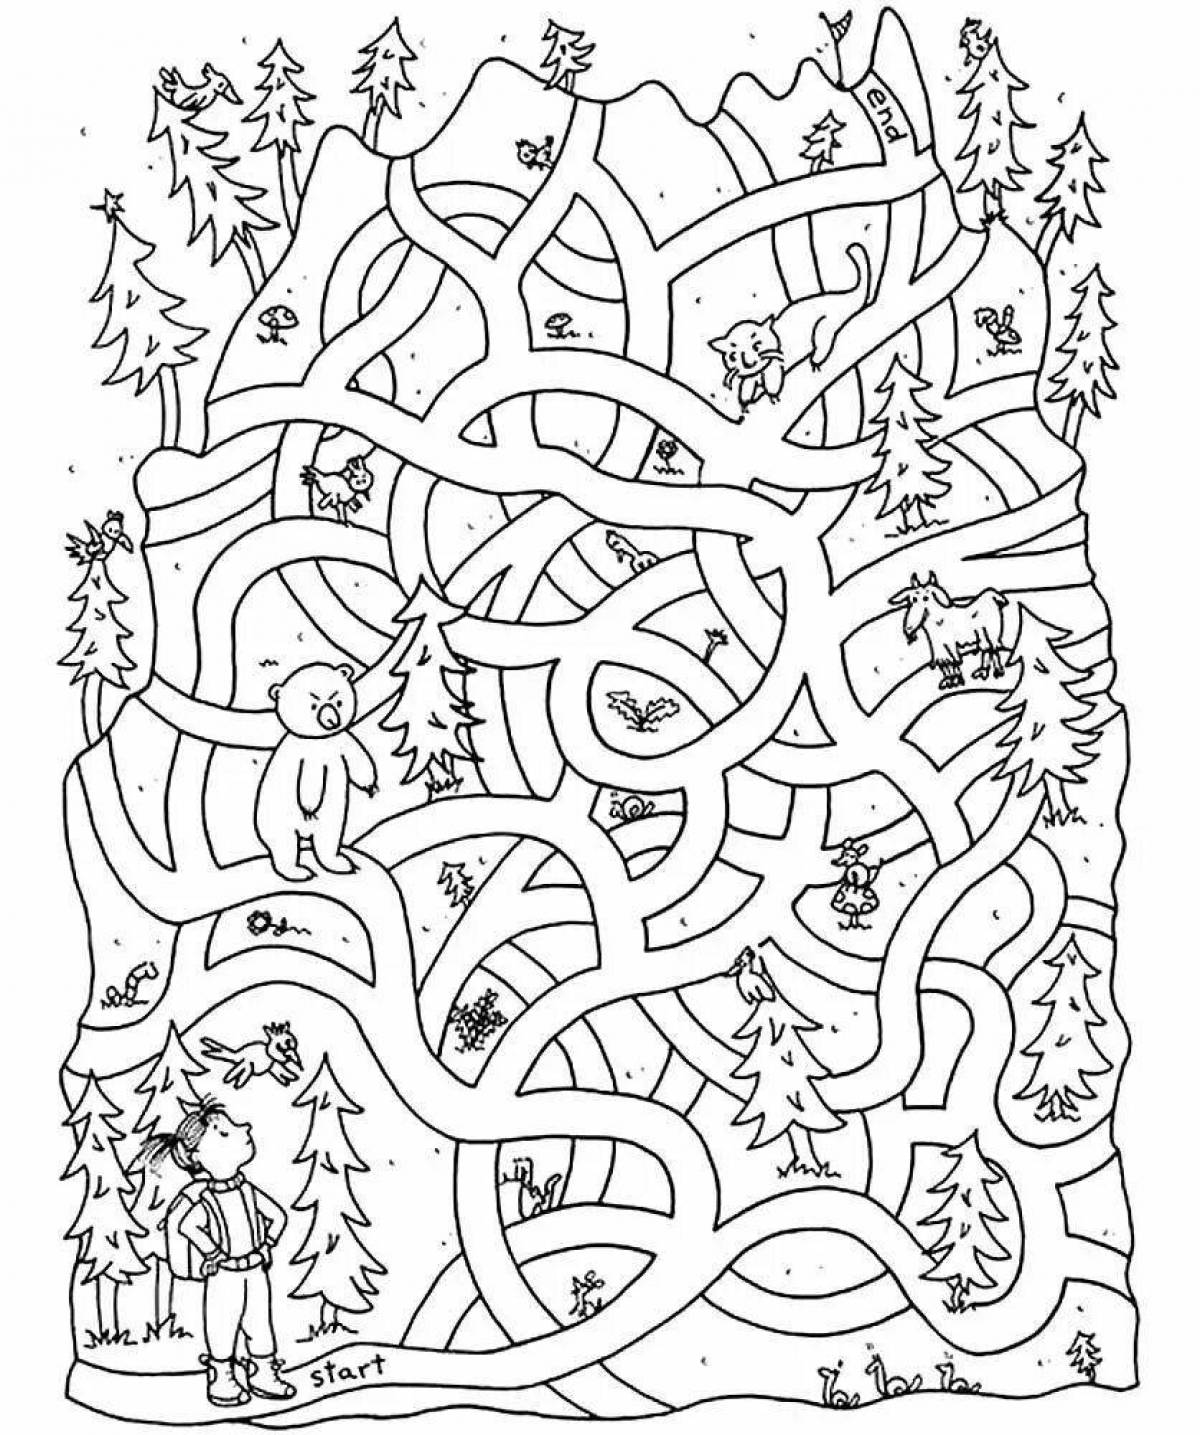 Coloring bright maze for children 10 years old